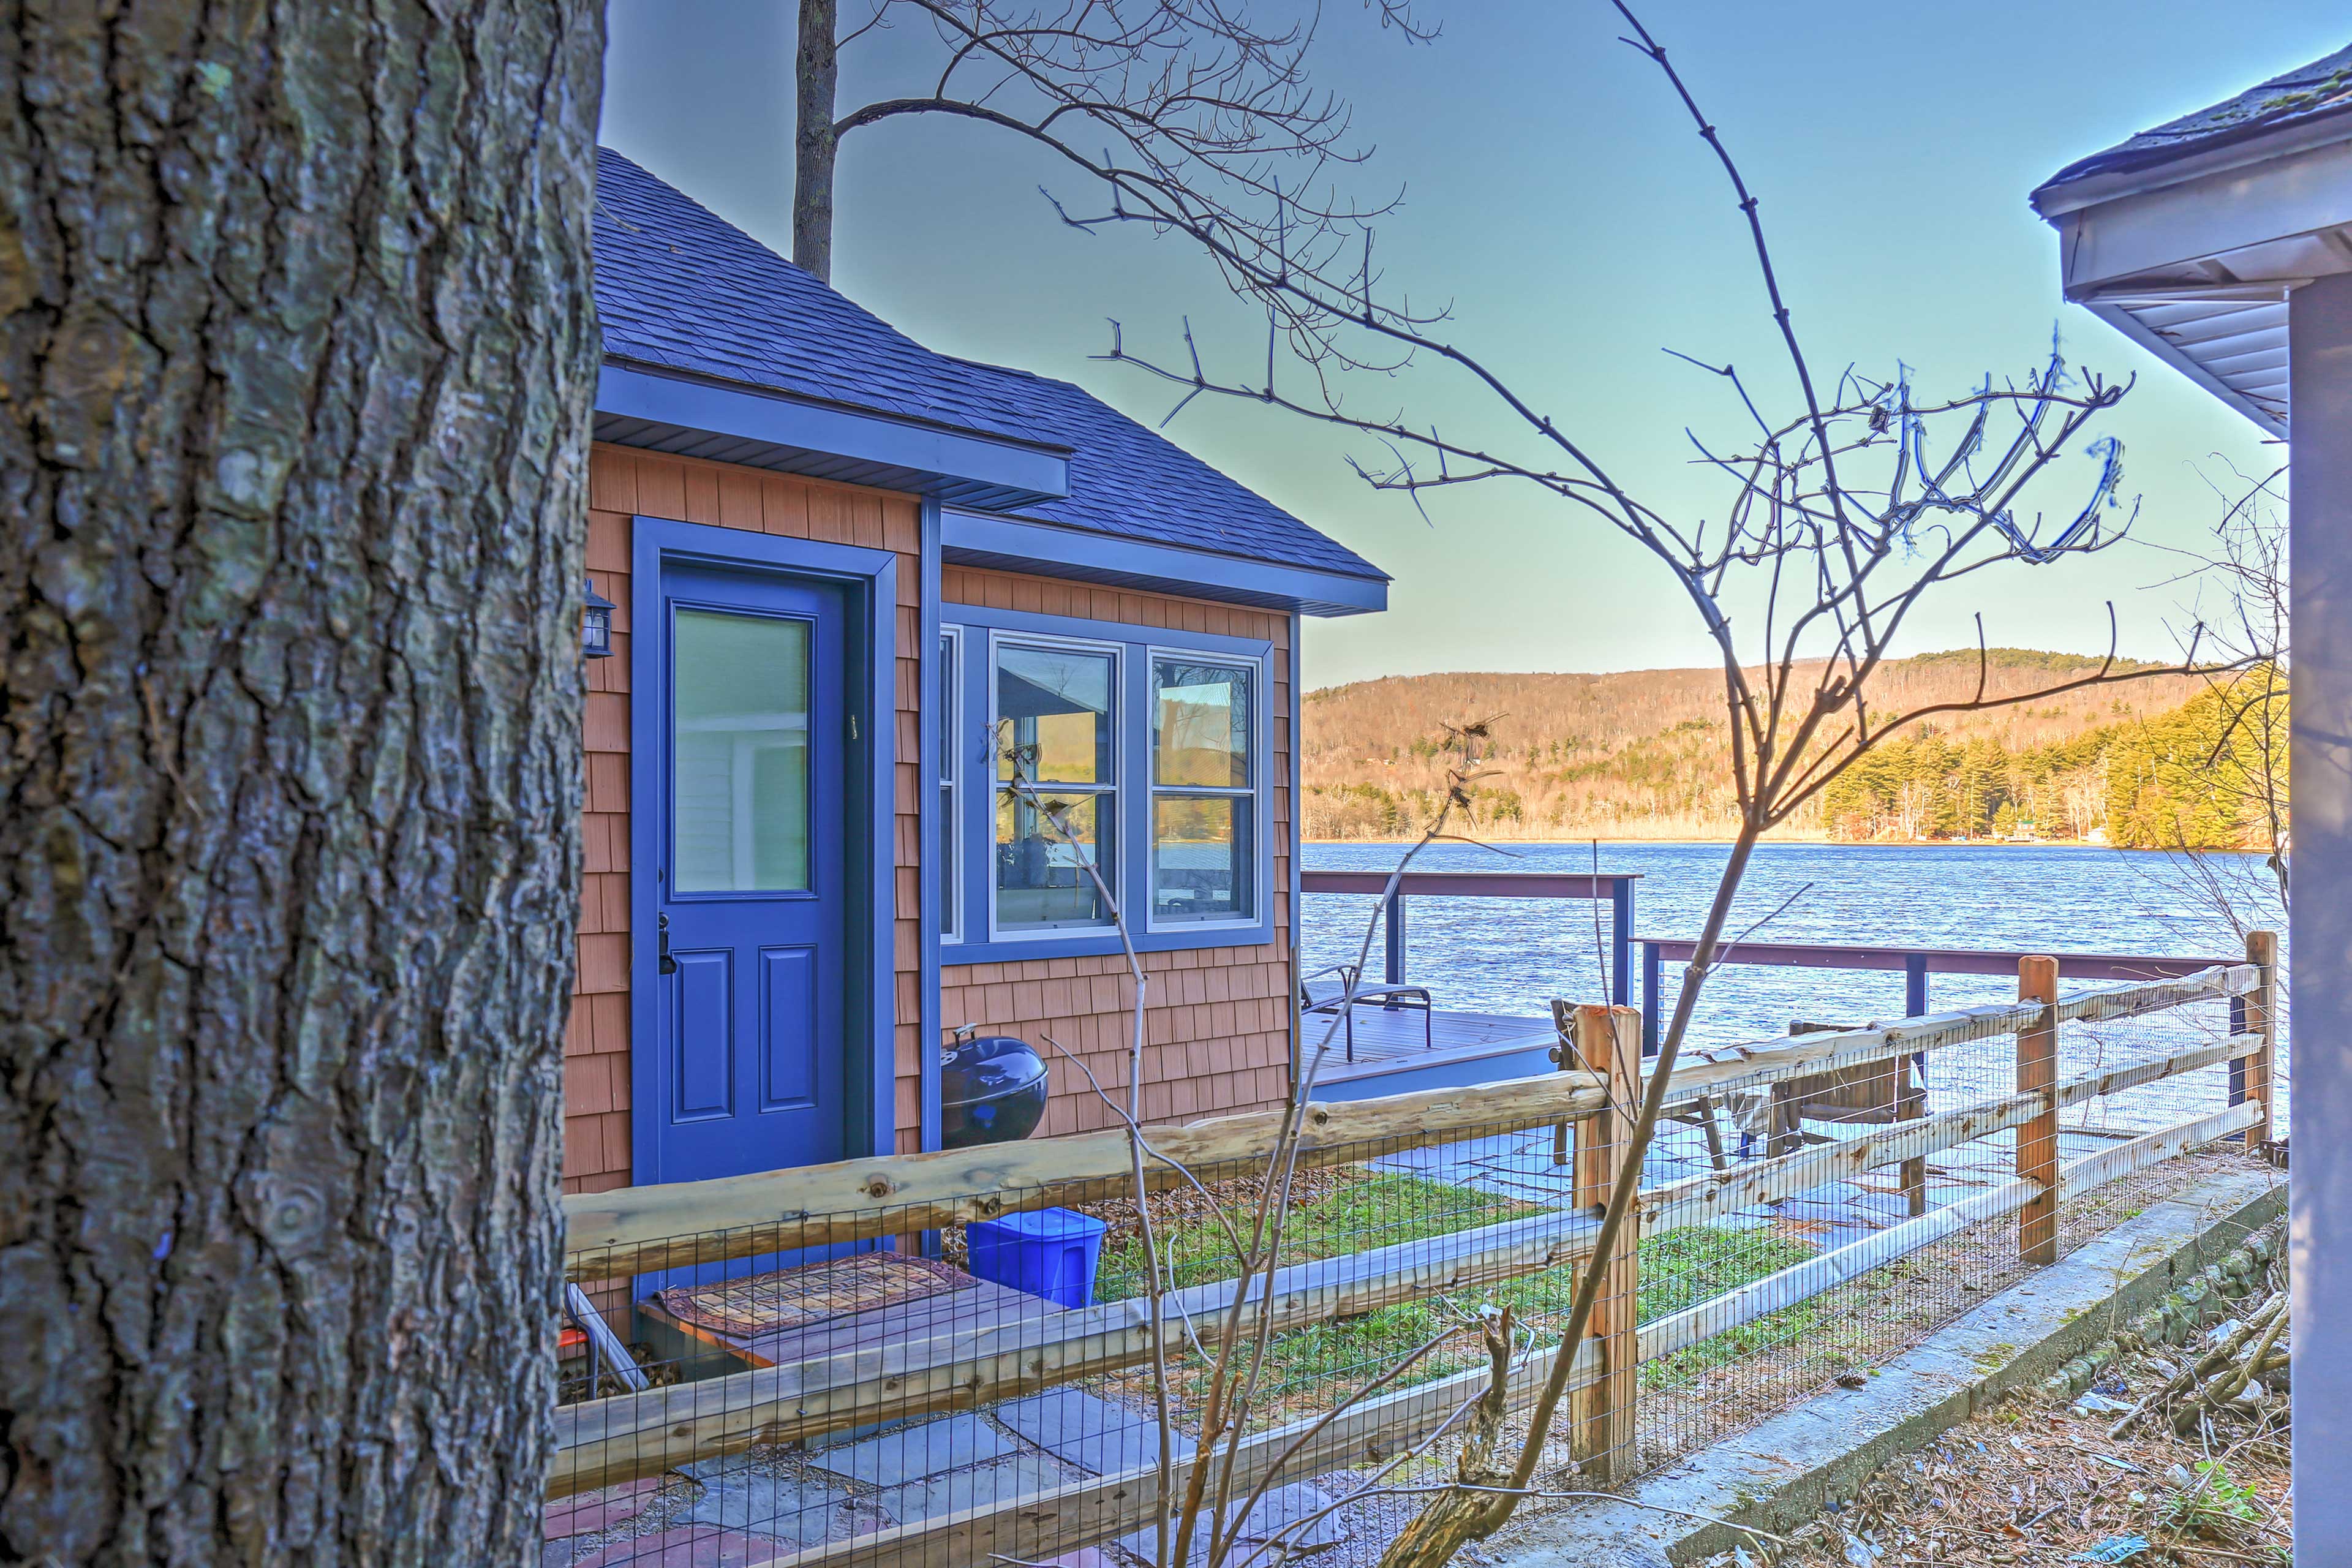 Waterfront Cottage: 10 Min to Great Barrington!